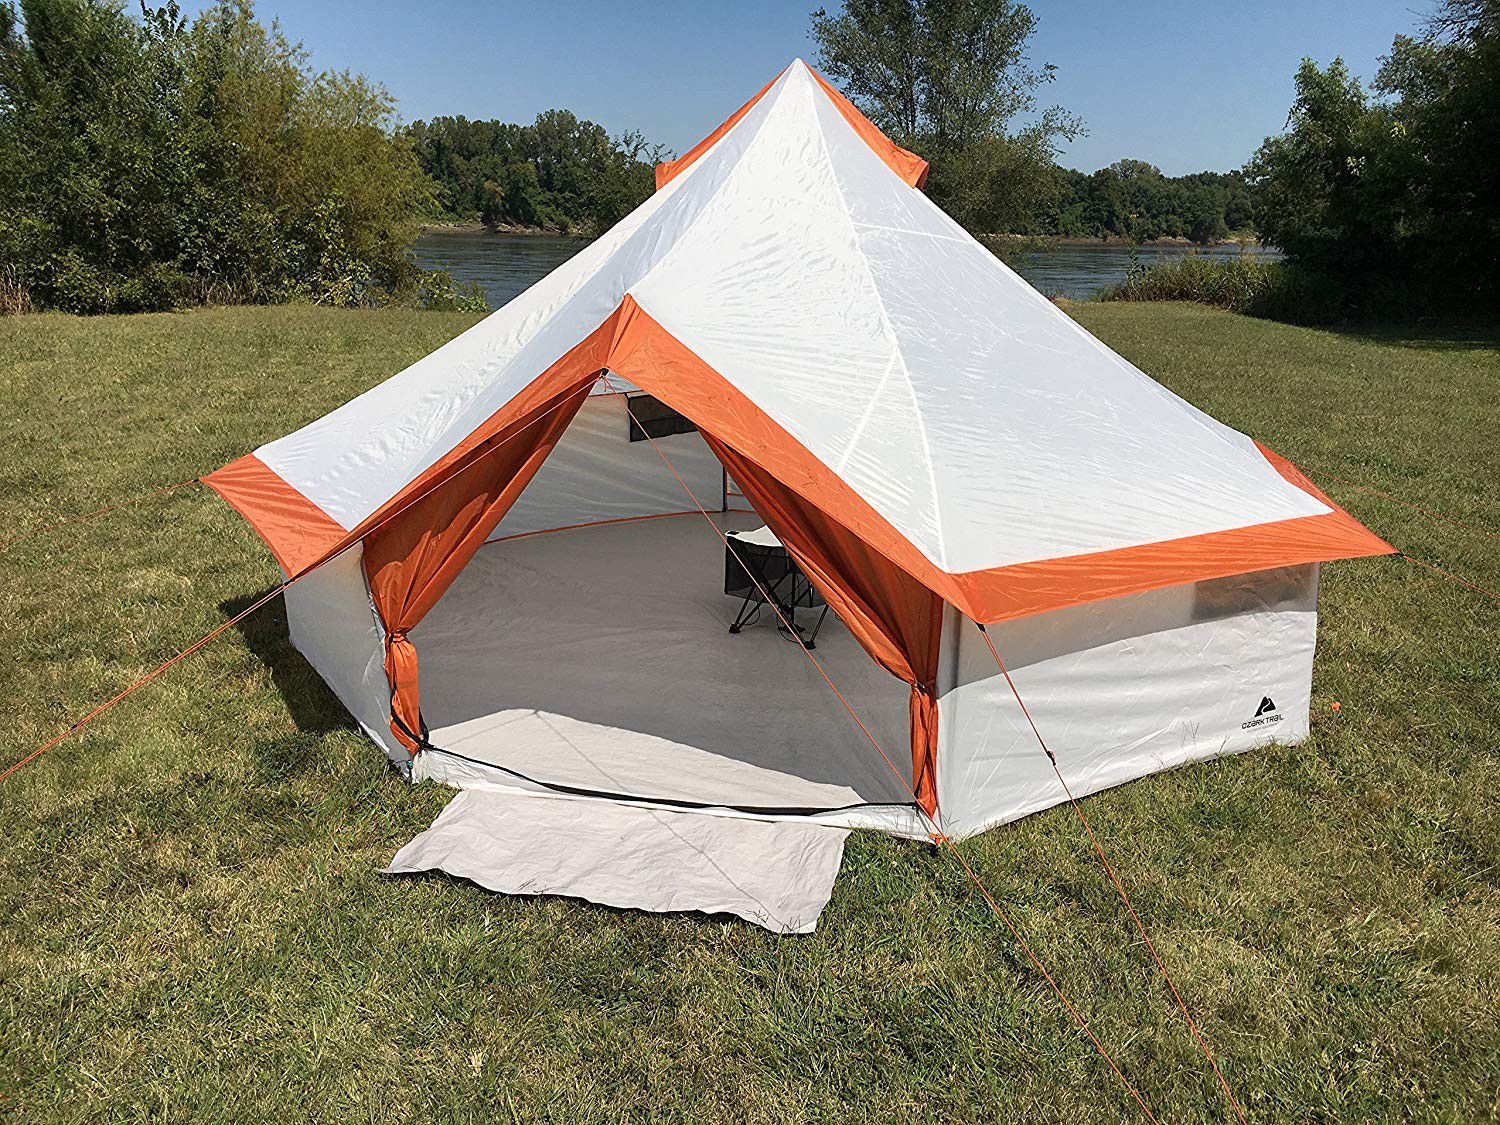 Camping Vacation Tent 8 Persons Ozark Trail Yurt With Mud Mat Family Outing Picnic Music Festival Park, Pickup